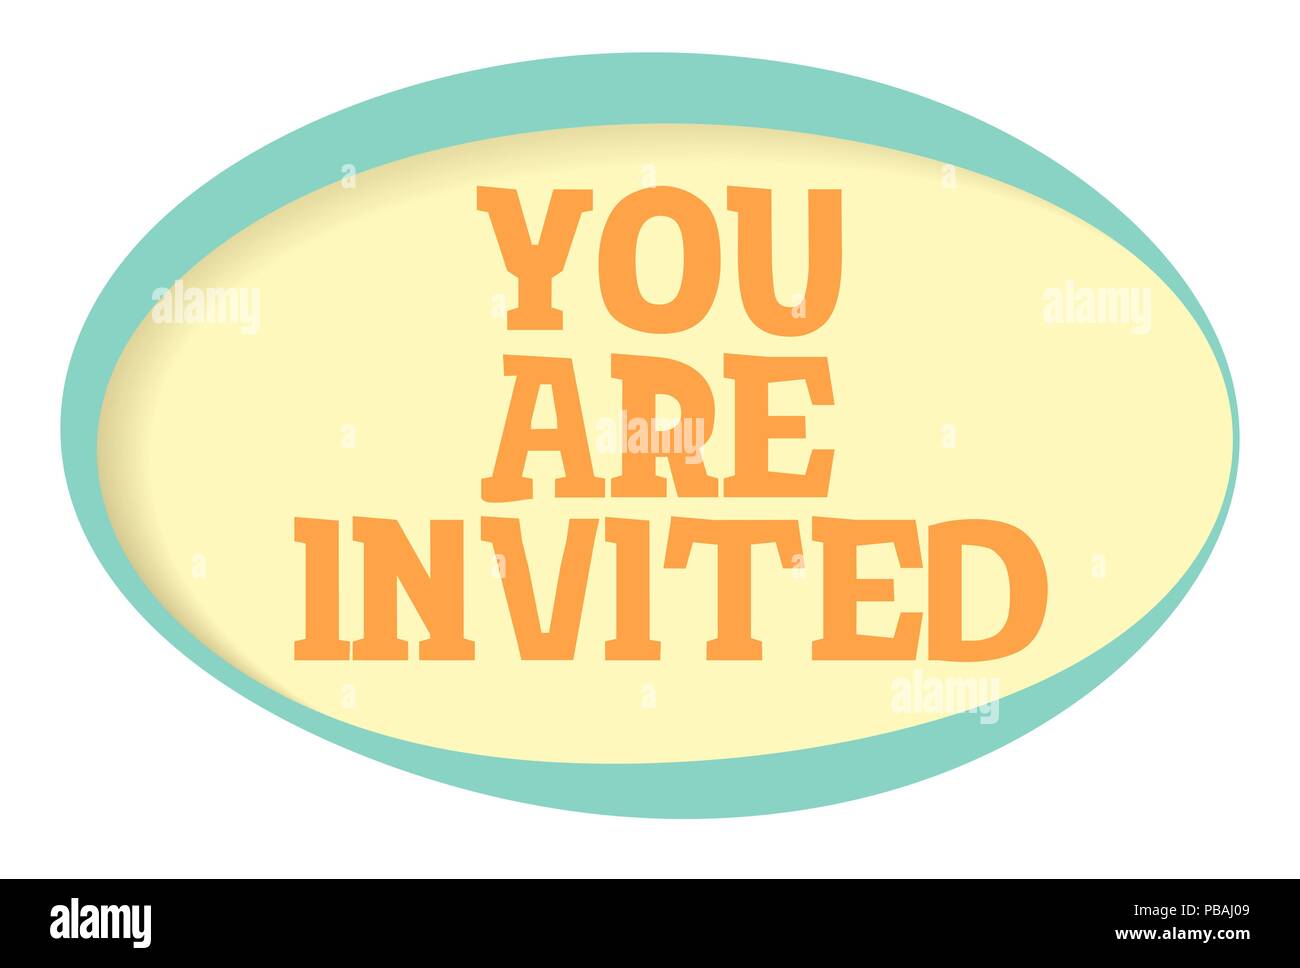 You are invited vector sticker. Volume frame with shadow. Speech bubble in retro style. Stock Vector